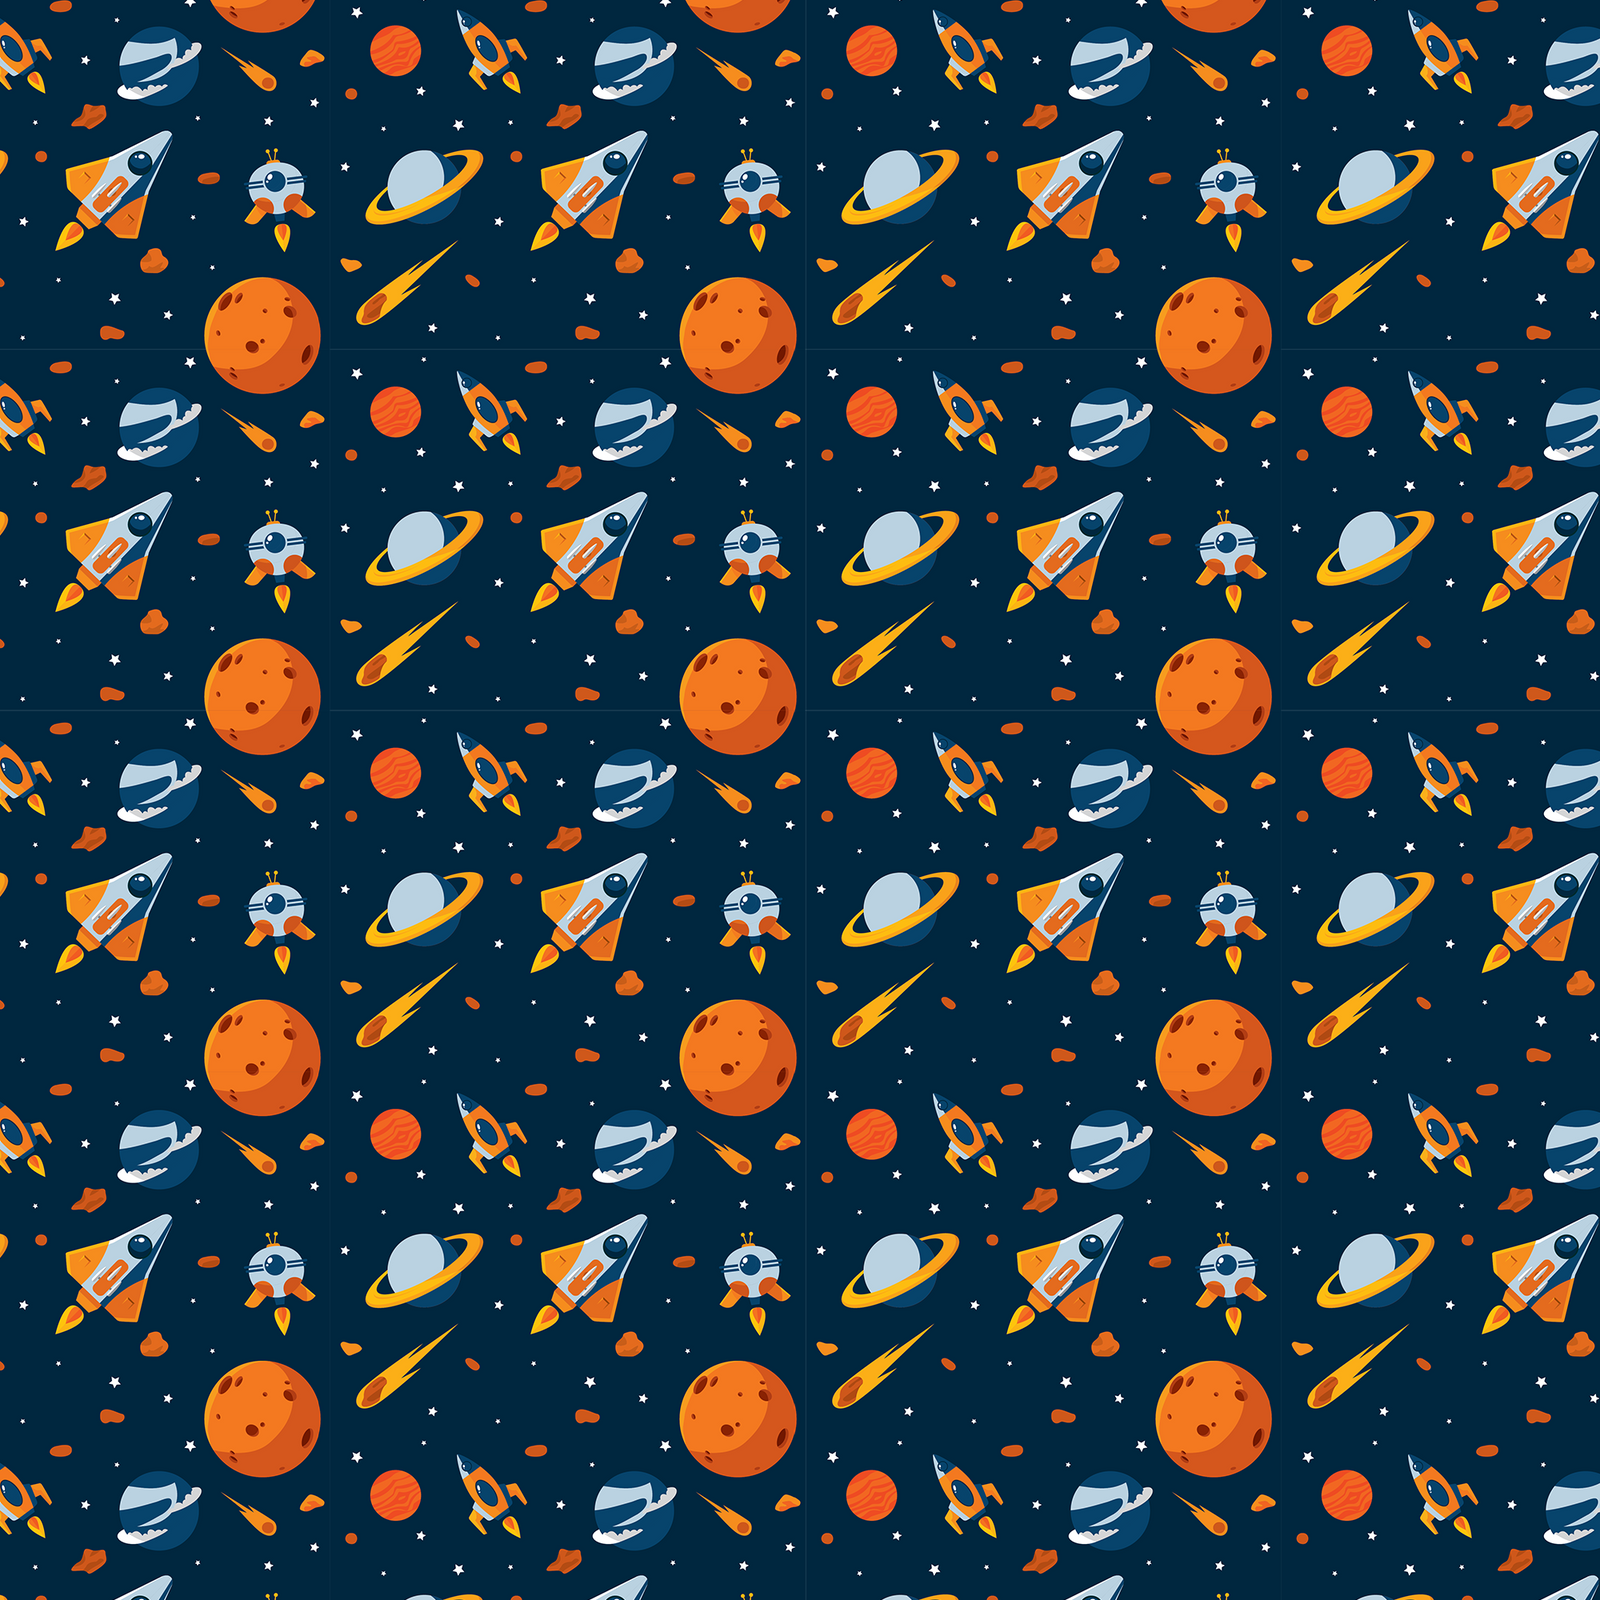 Rocket Planets and Star in Space Theme Wallpaper